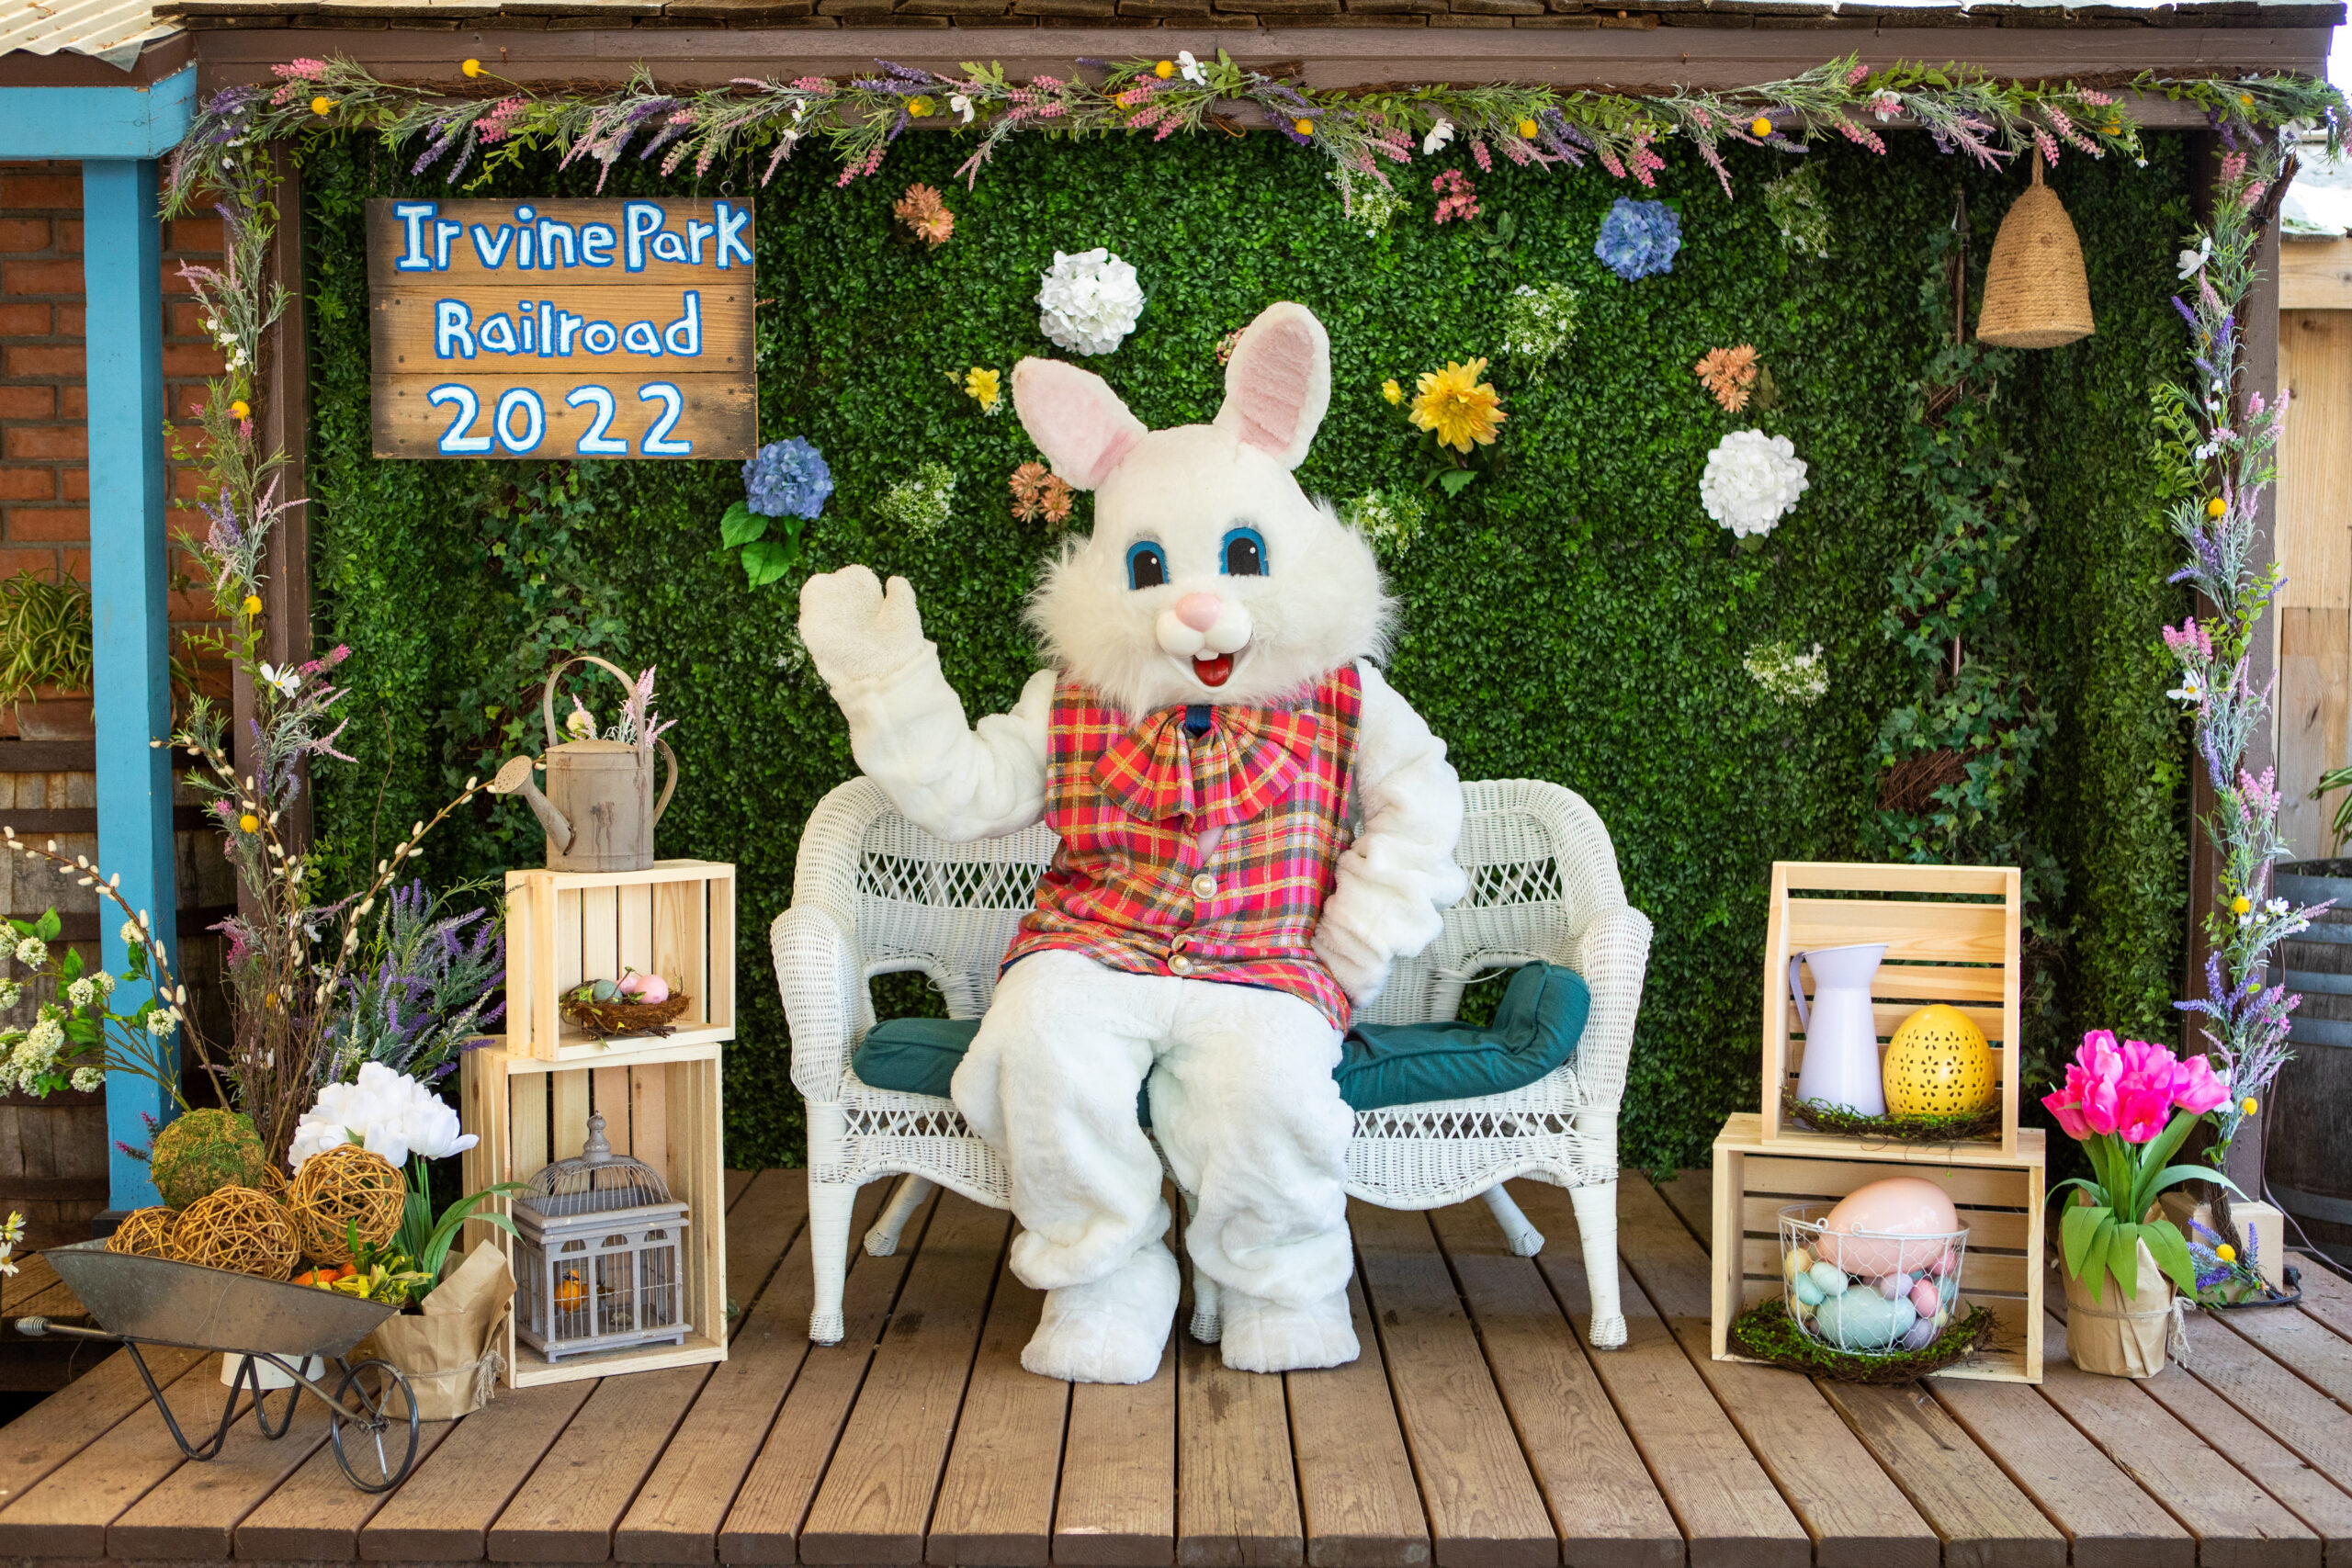 Meet the Easter Bunny at Irvine Park Railroad